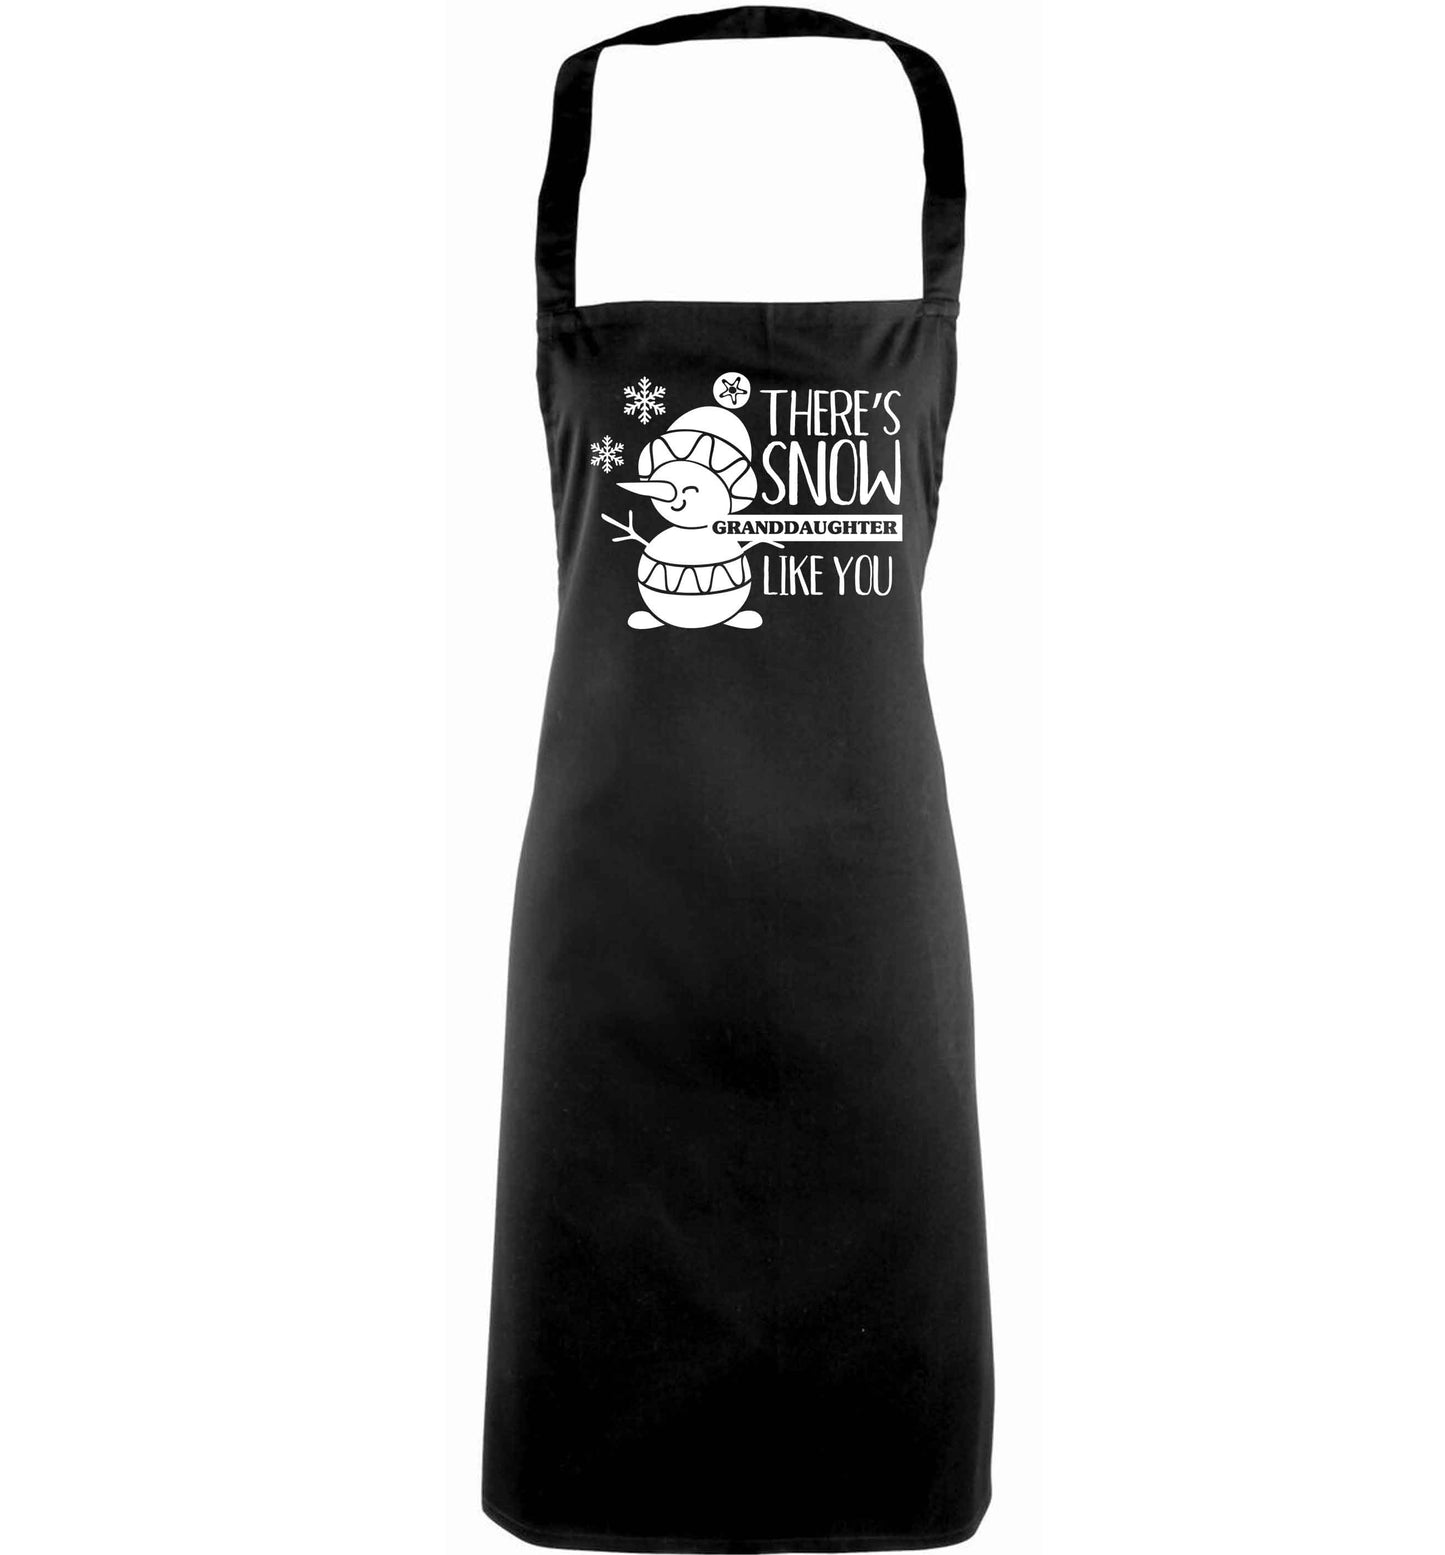 There's snow granddaughter like you adults black apron